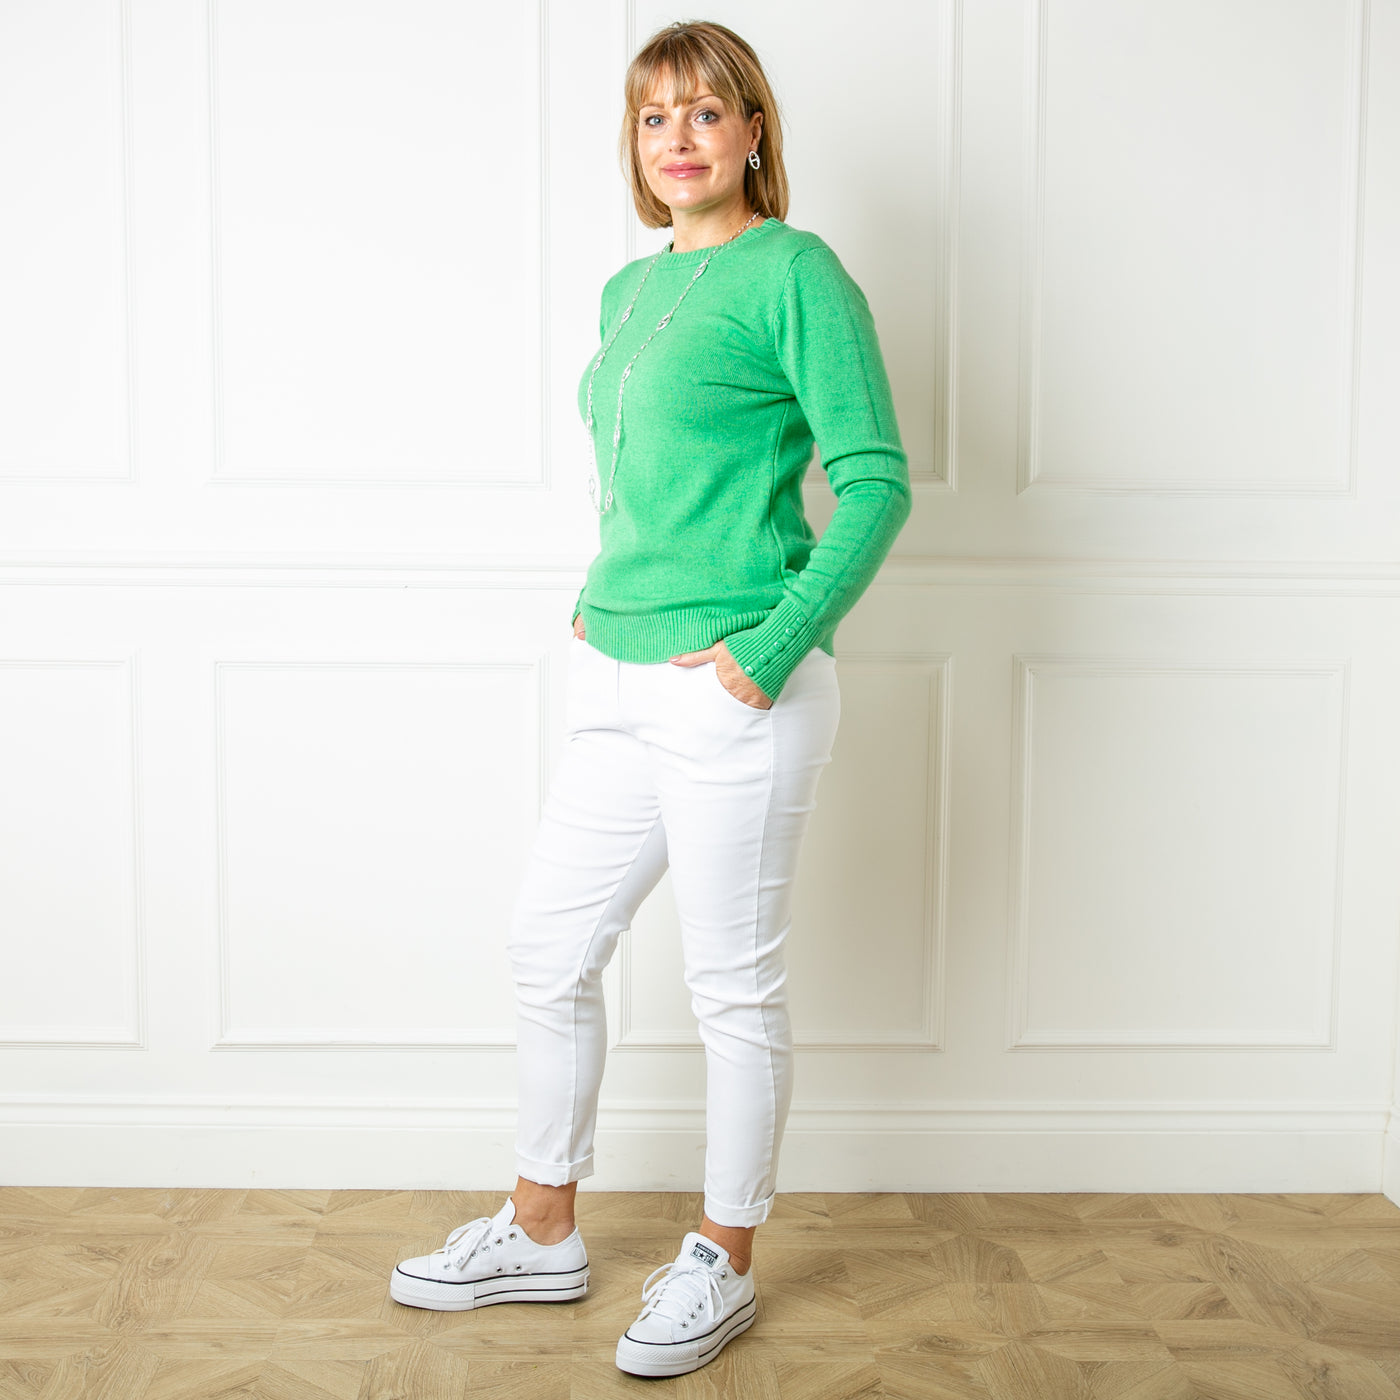 The emerald green Crew Neck Button Jumper with ribbed detailing on the cuffs, neckline and bottom hemline